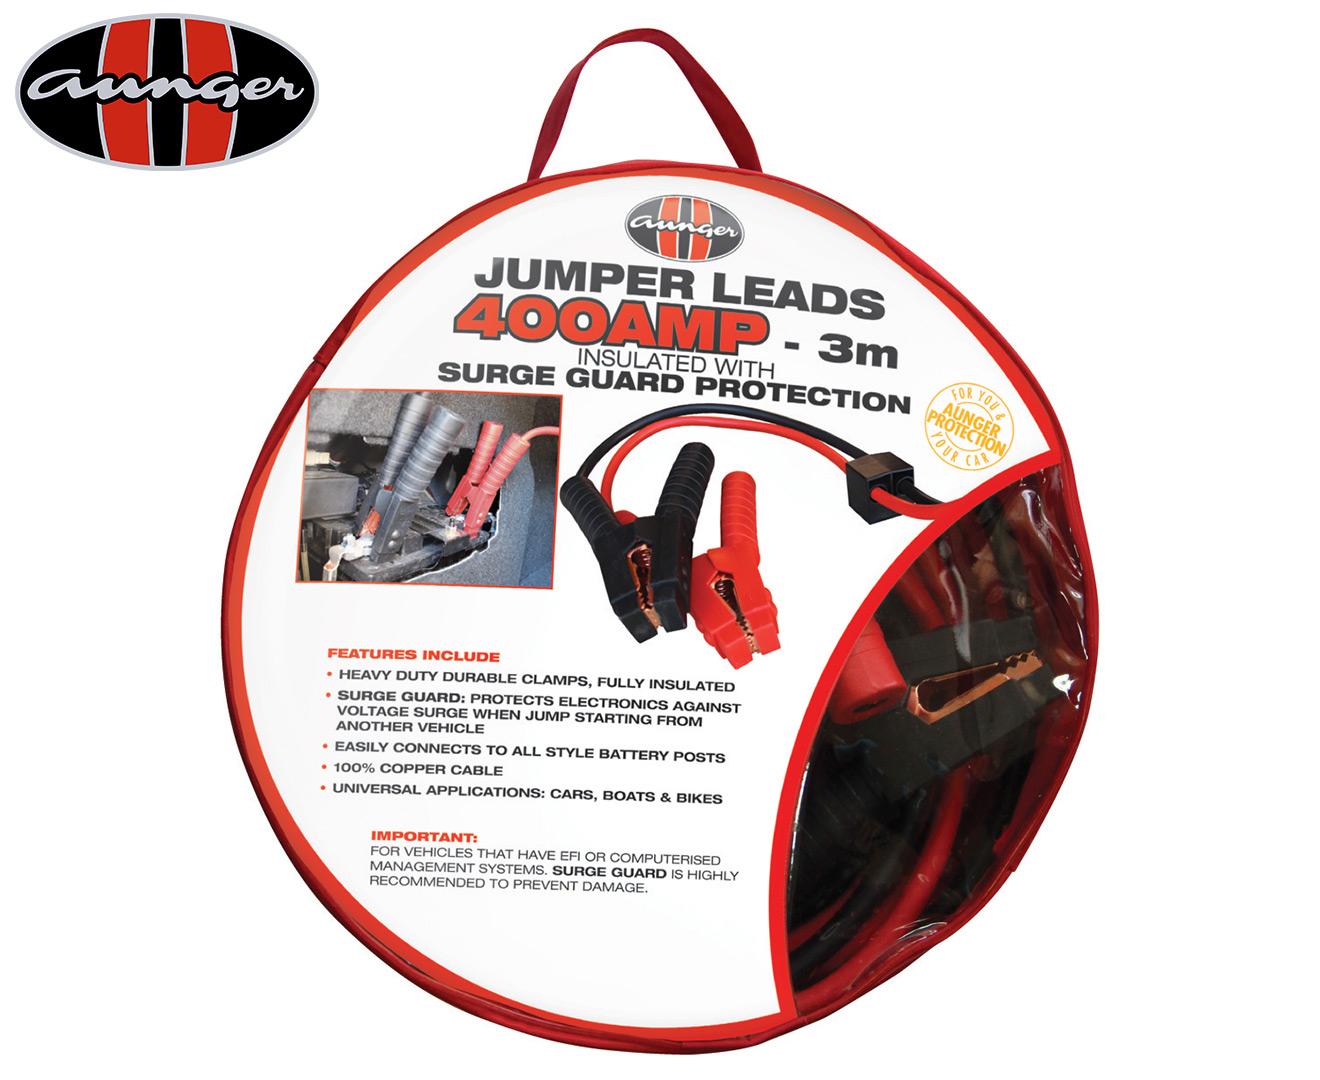 3m Car Van Vehicle Jumper Jump Cables Leads Battery Starter Booster 1200amp NEW 